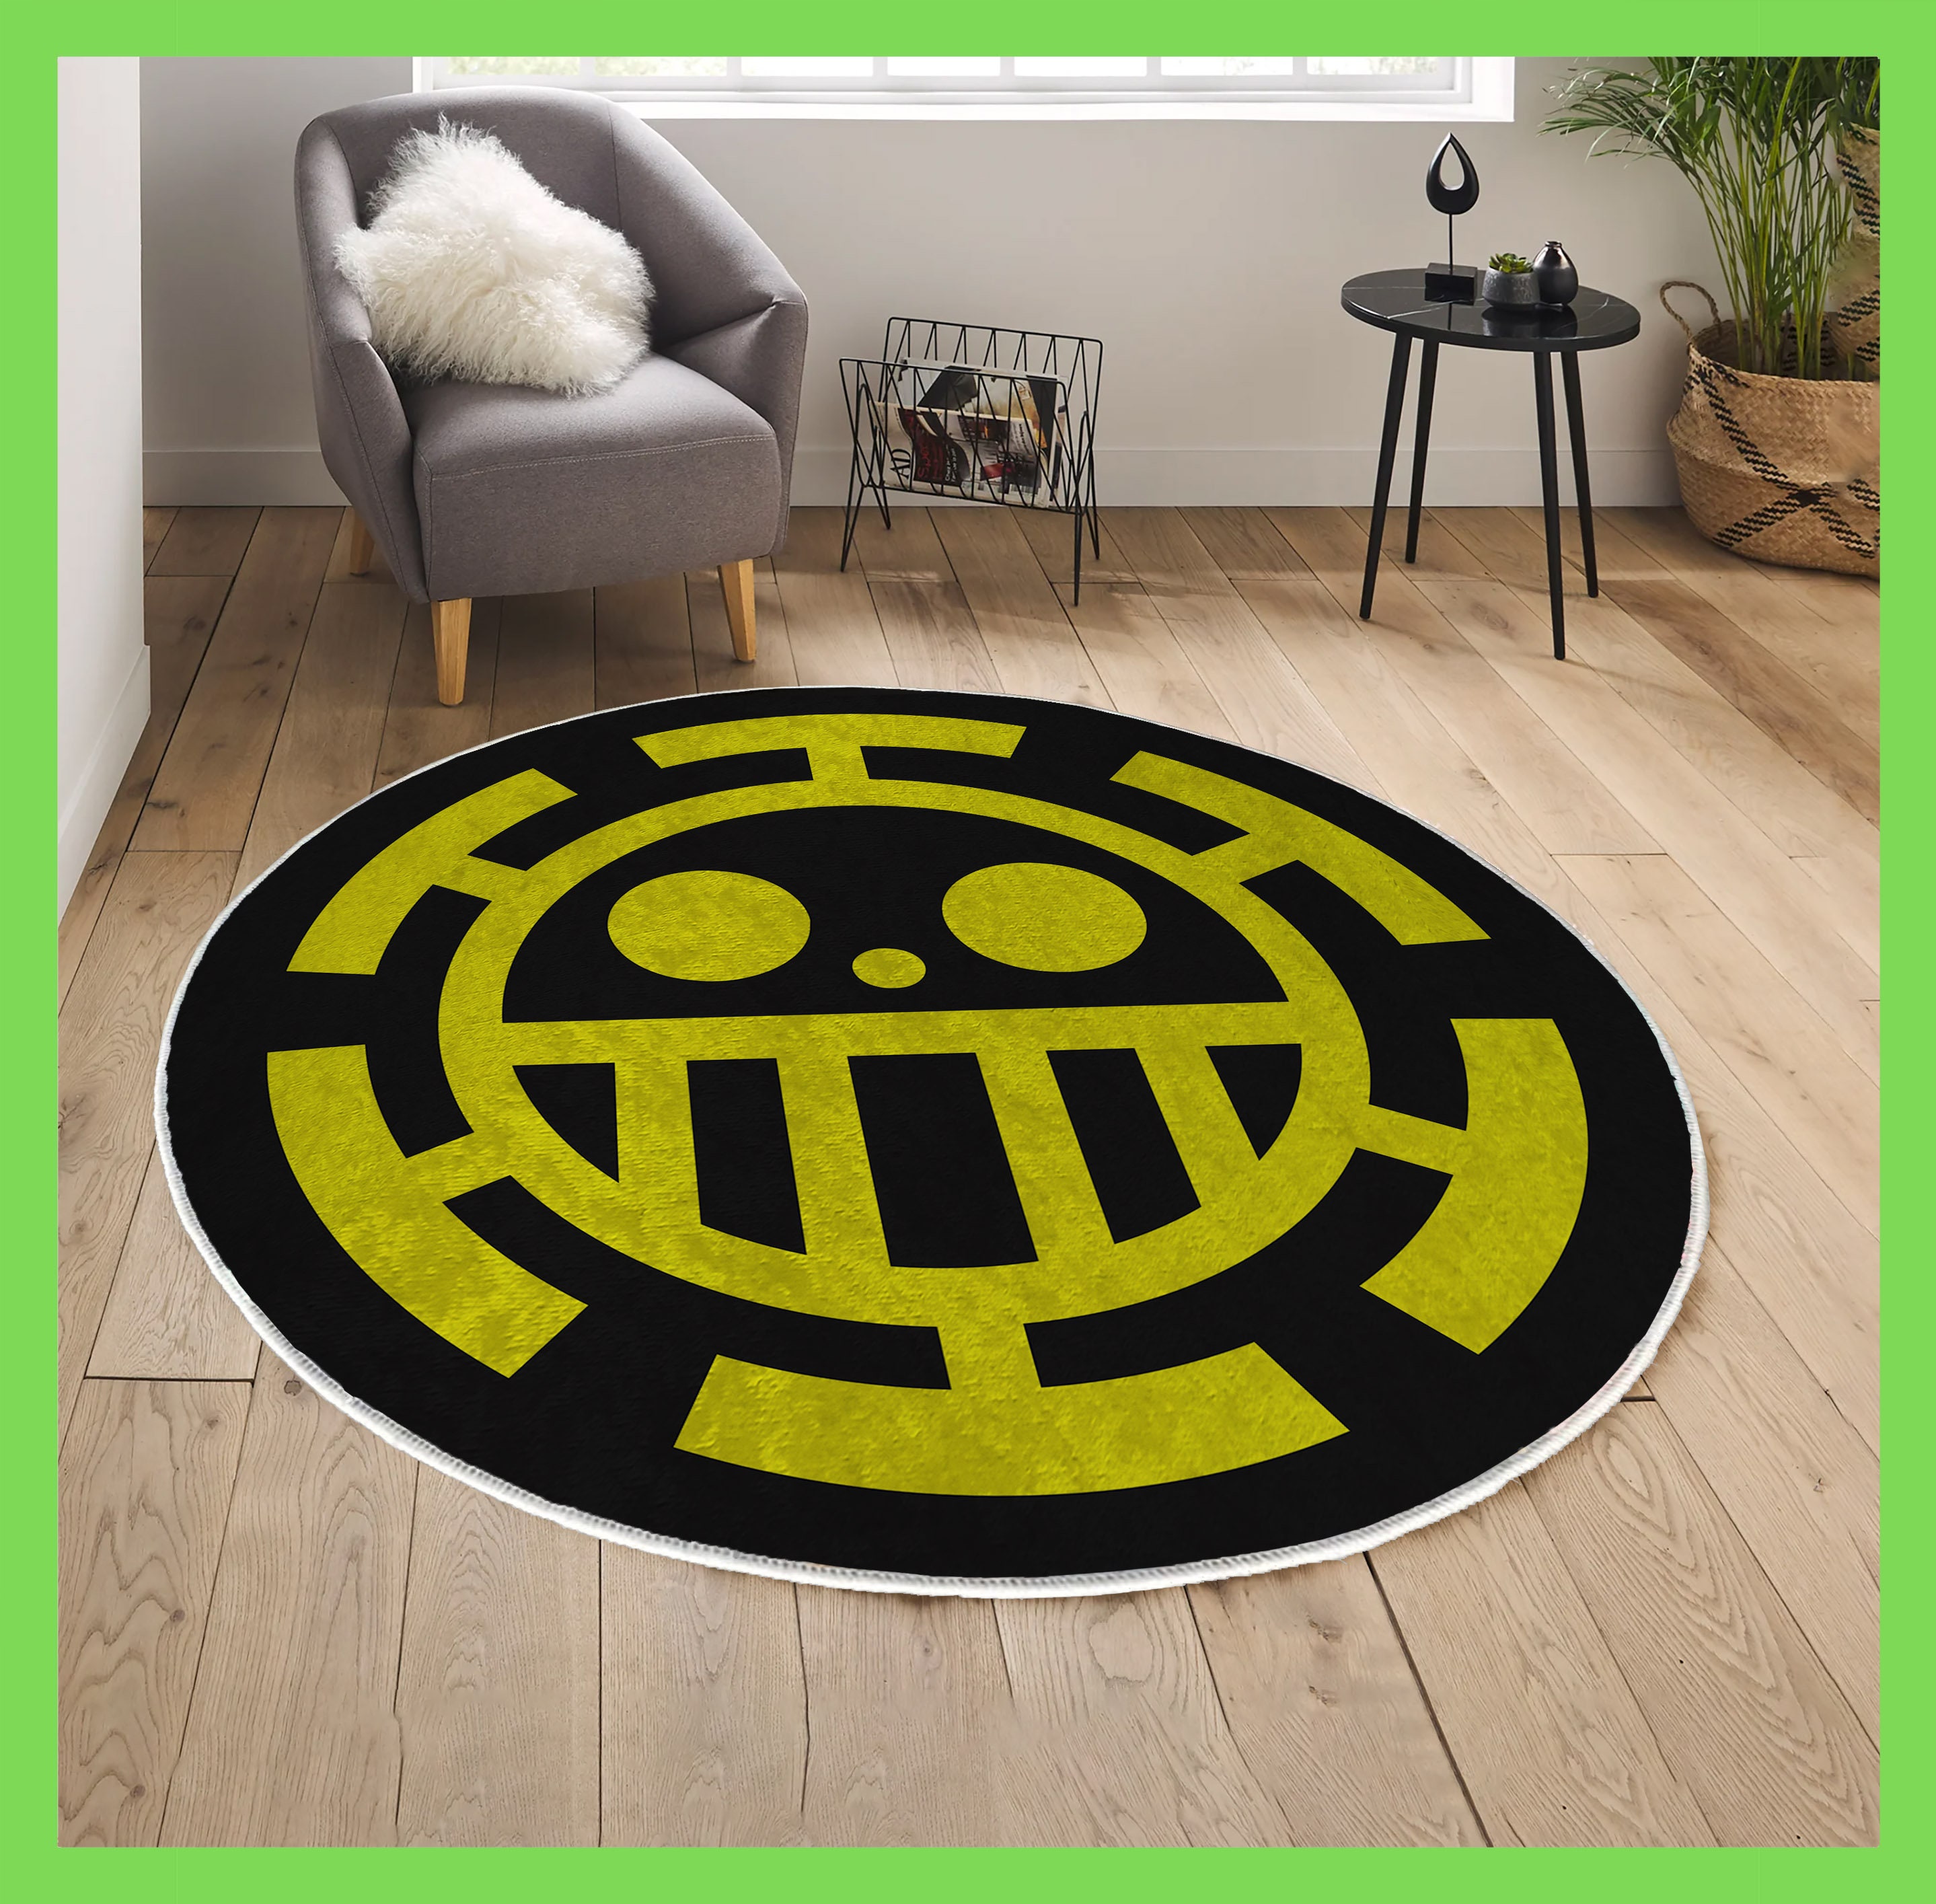 Buy Anime Rug Online In India - Etsy India